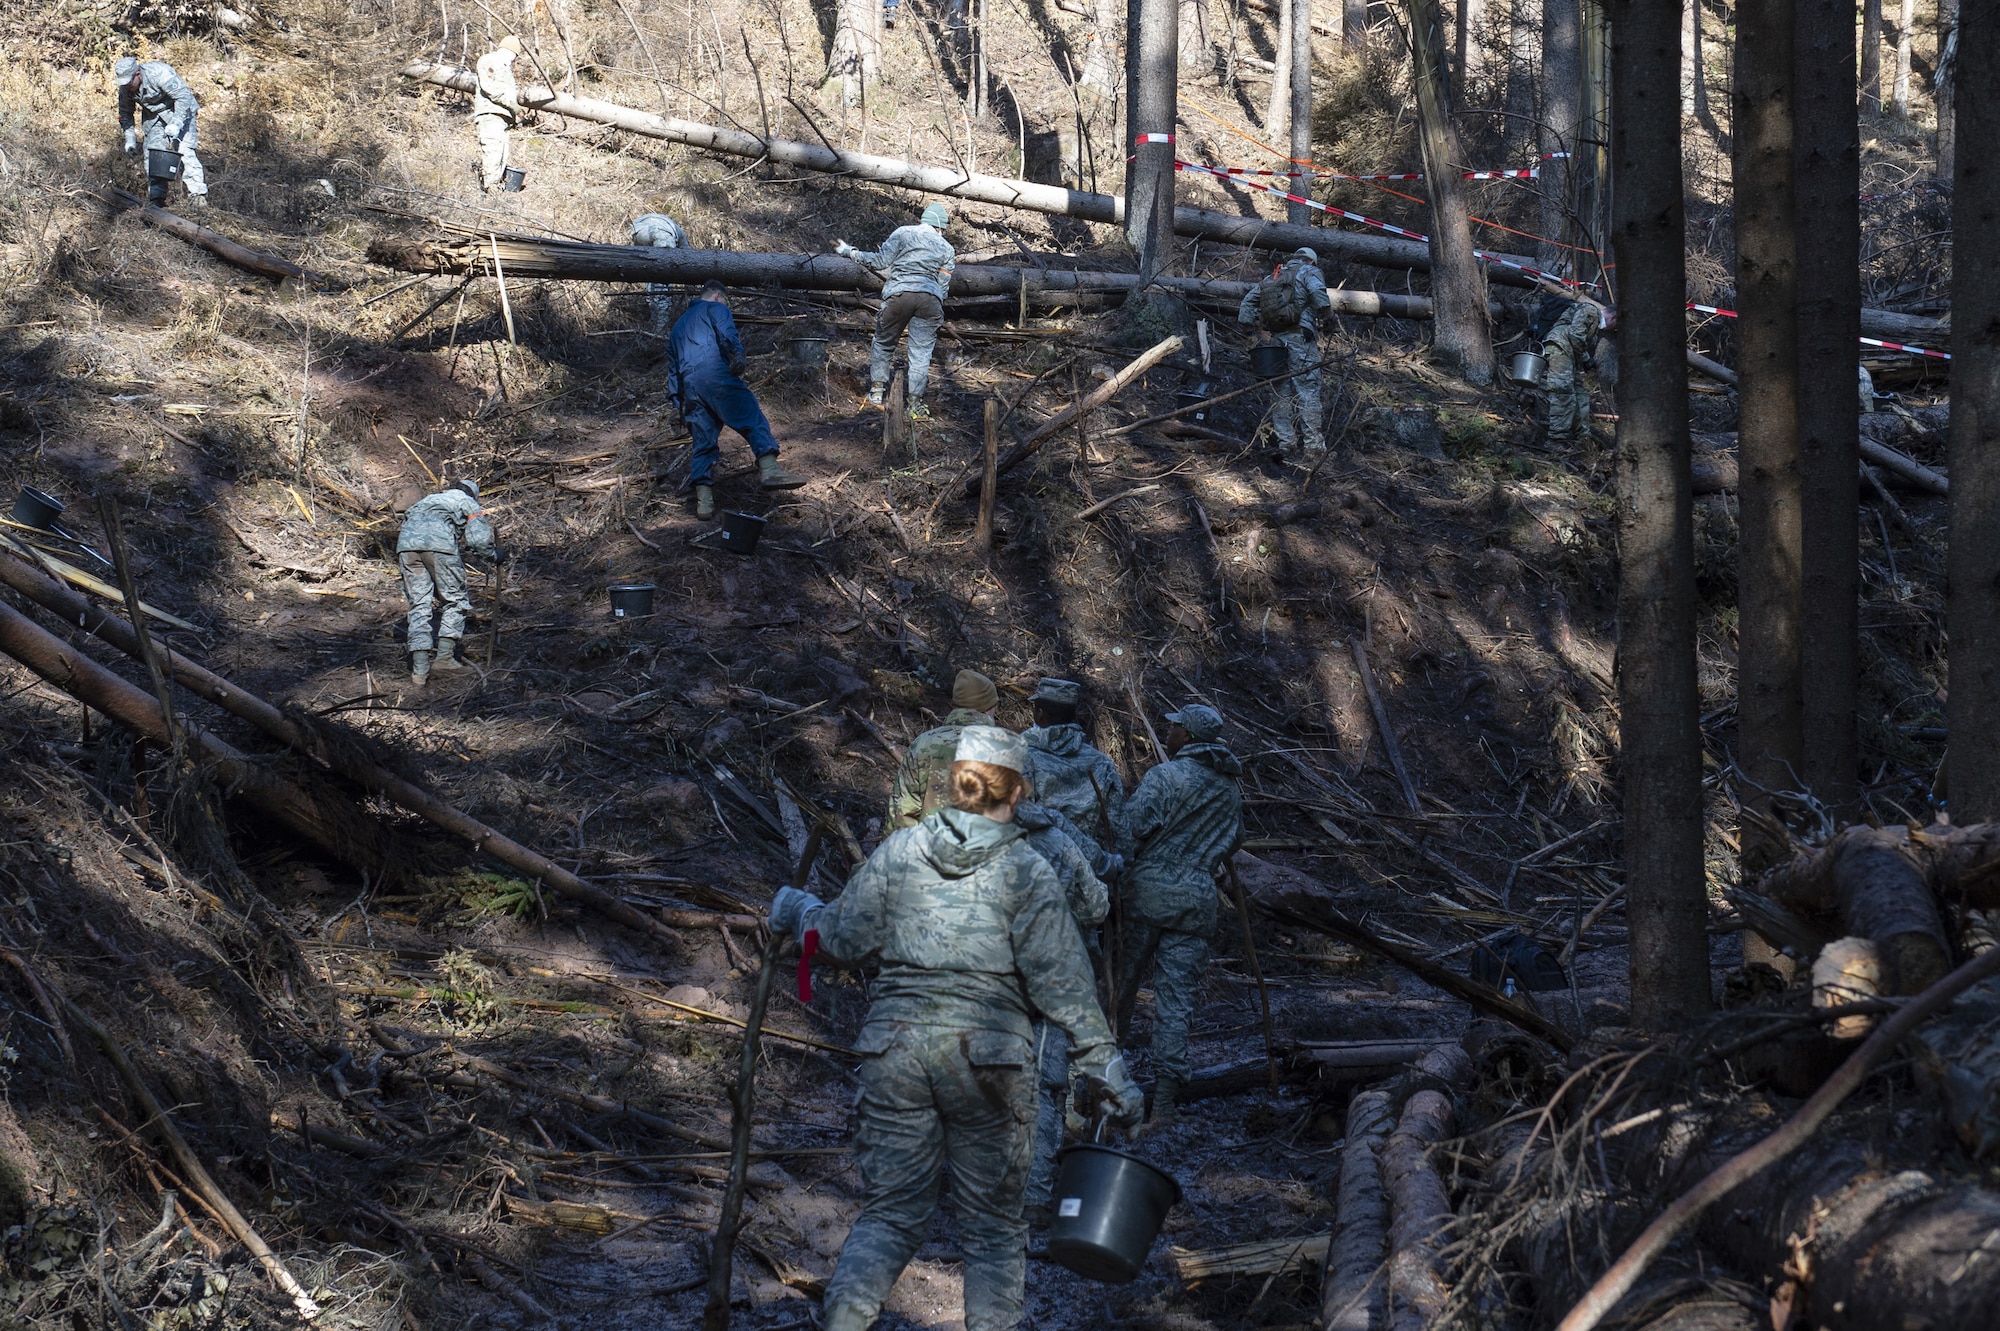 Airmen have worked in the dense wooded area digging through thick vegetation to recover F-16 parts.